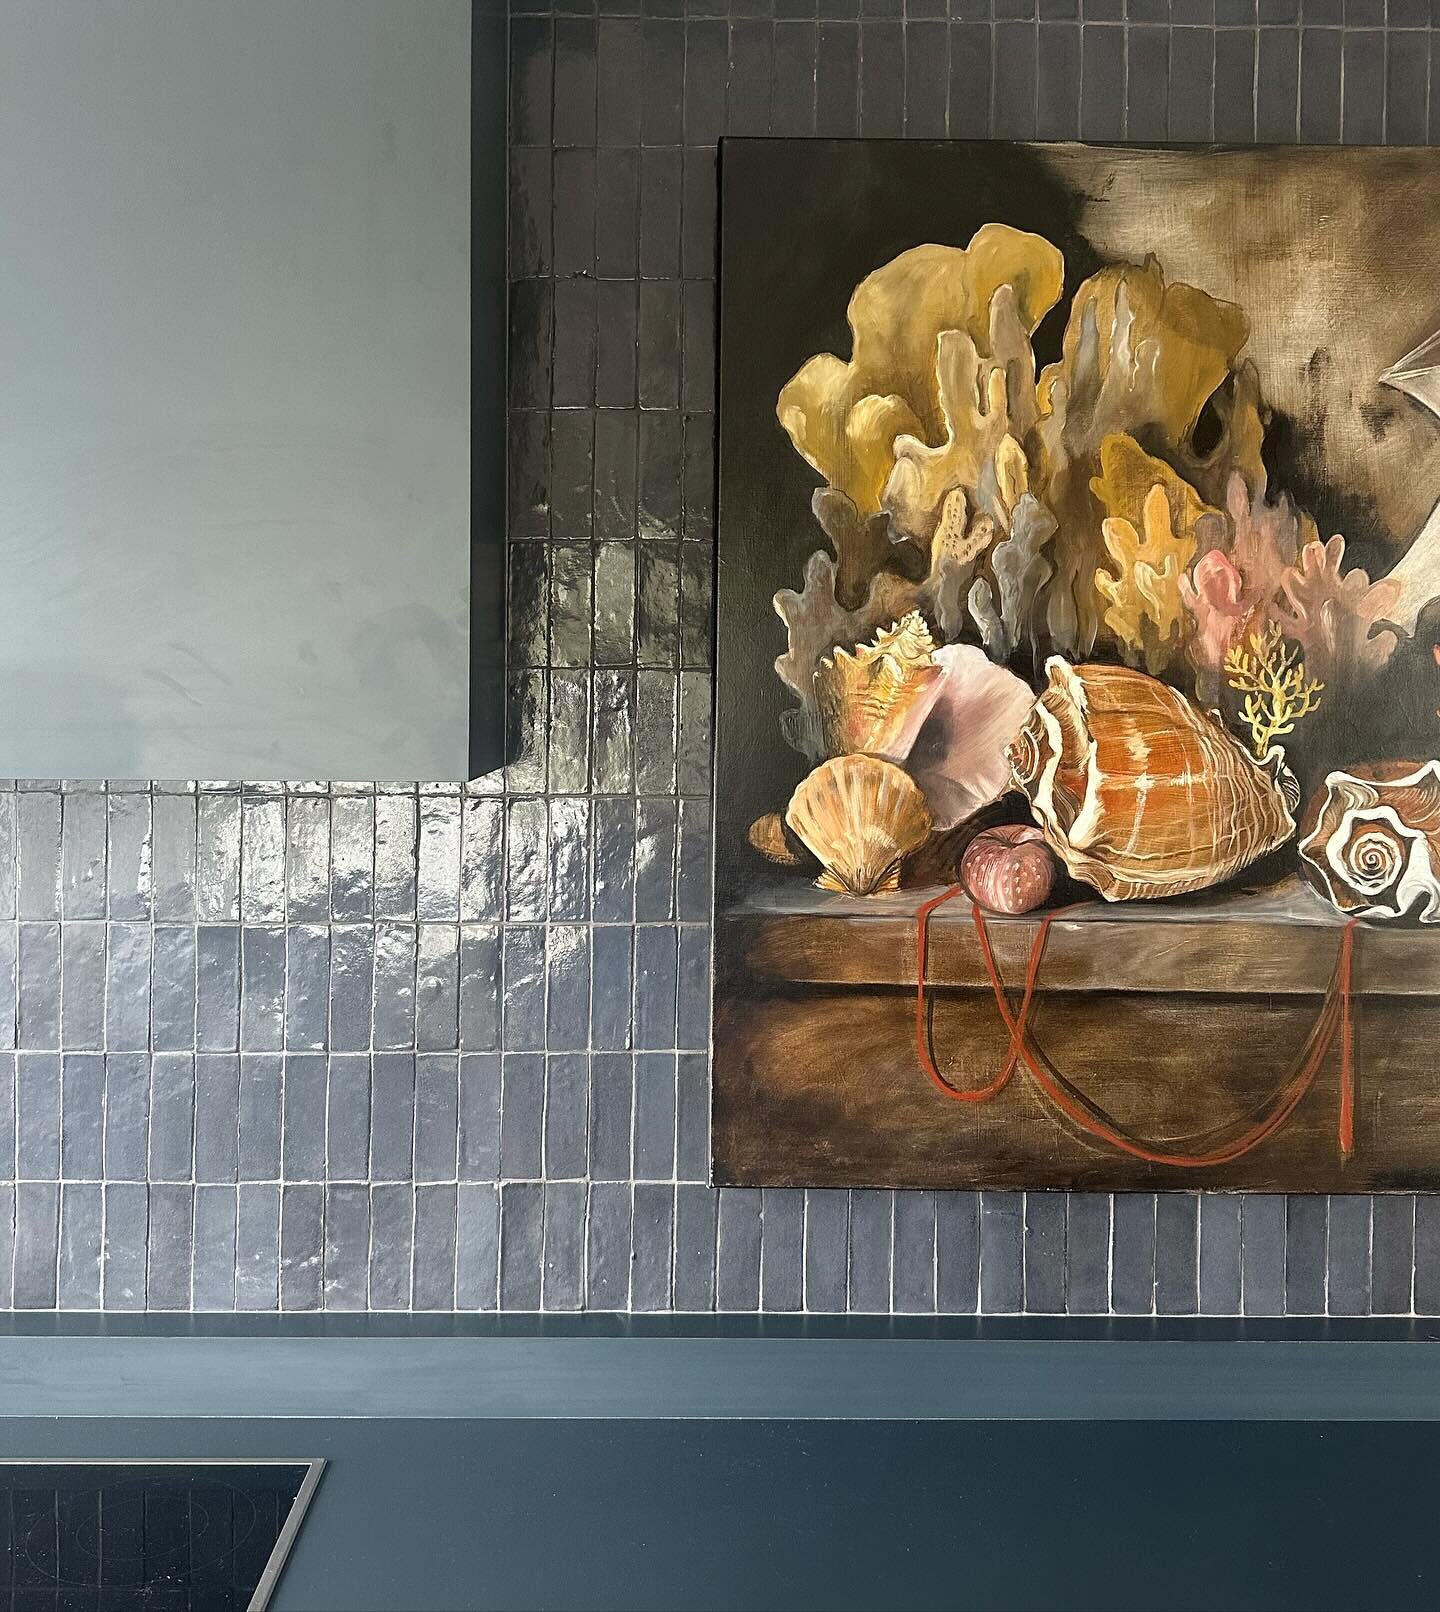 The most beautiful kitchen using our navy zellige tiles and matched with a stunning painting by the very talented @dianawatson70 #interiordesign #artist #tiles #zellige